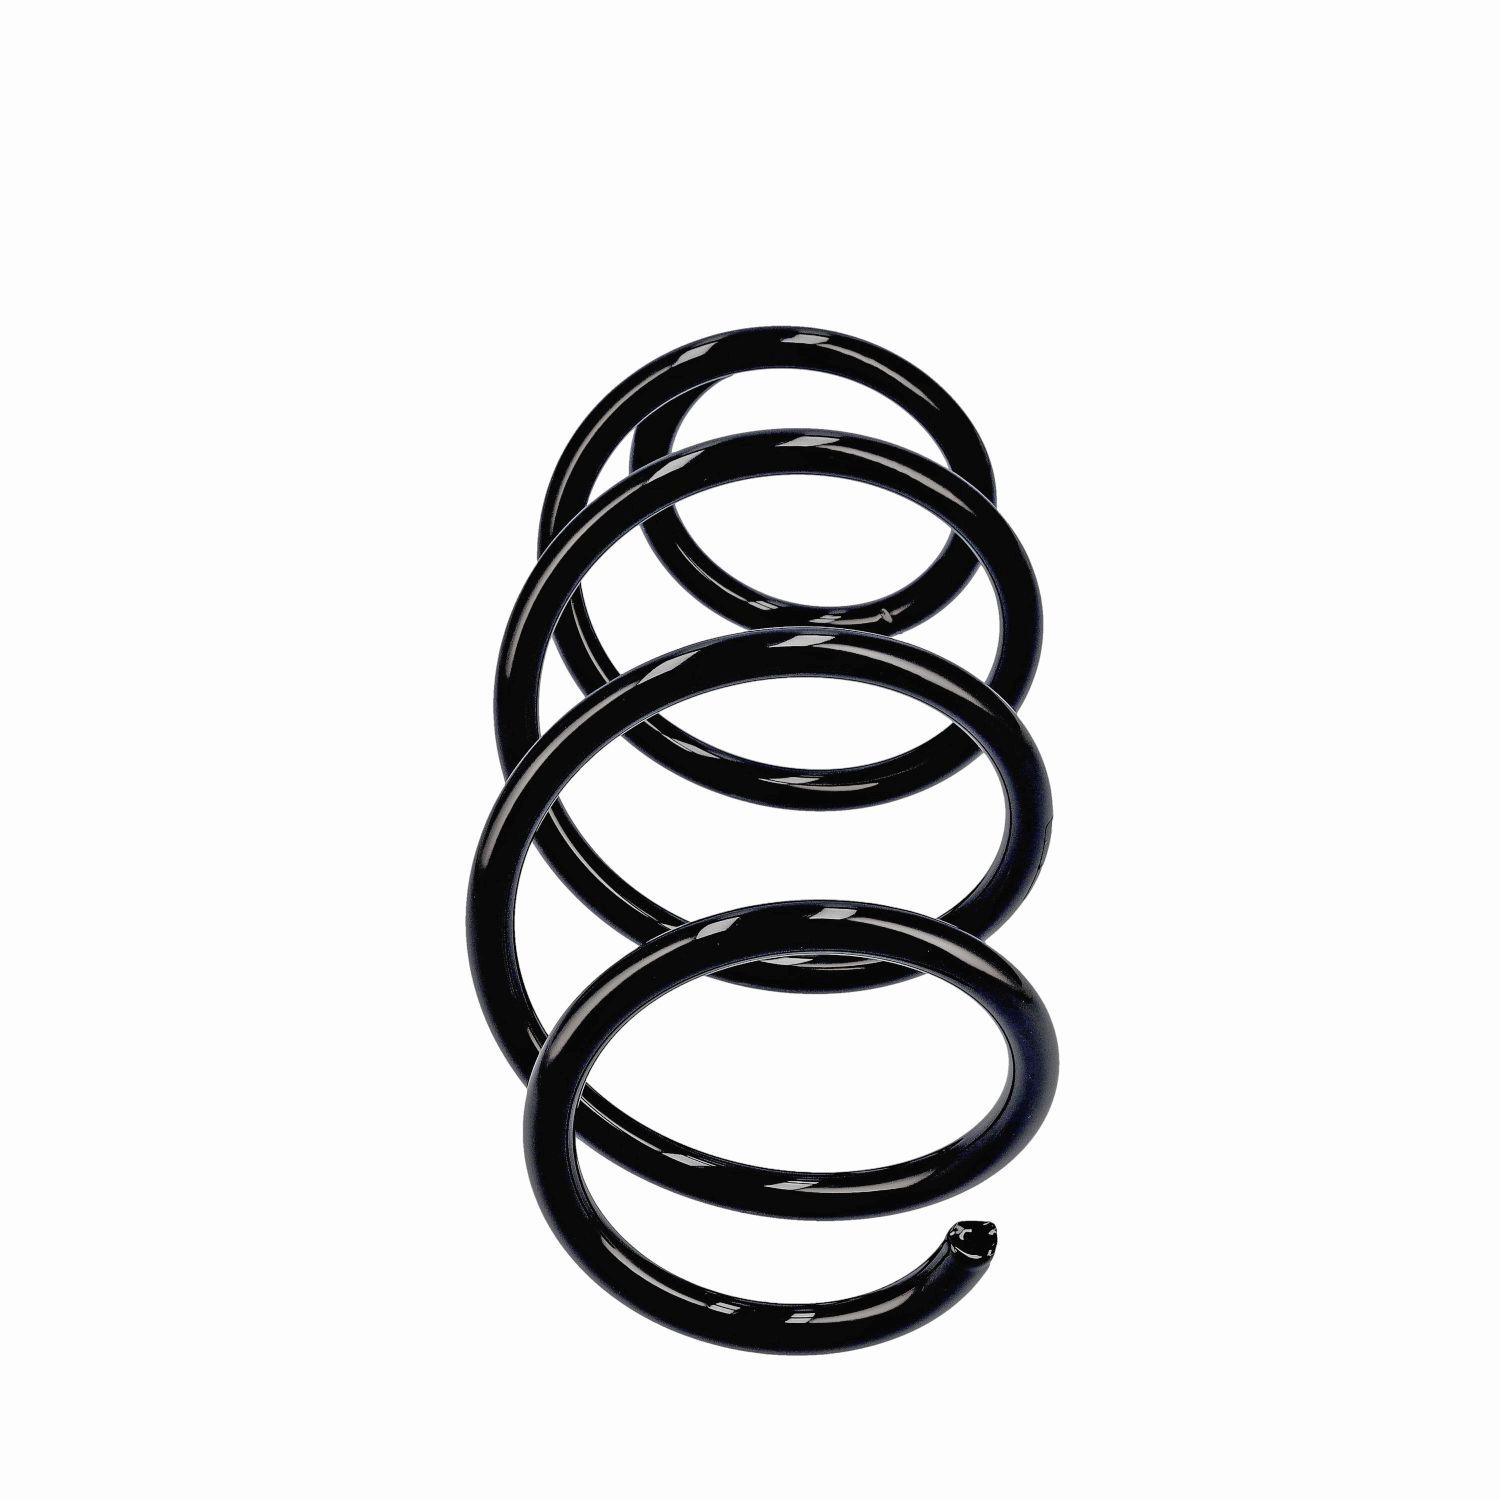 EIBACH Suspension springs rear and front VW Golf VIII Hatchback (CD1) new R19441